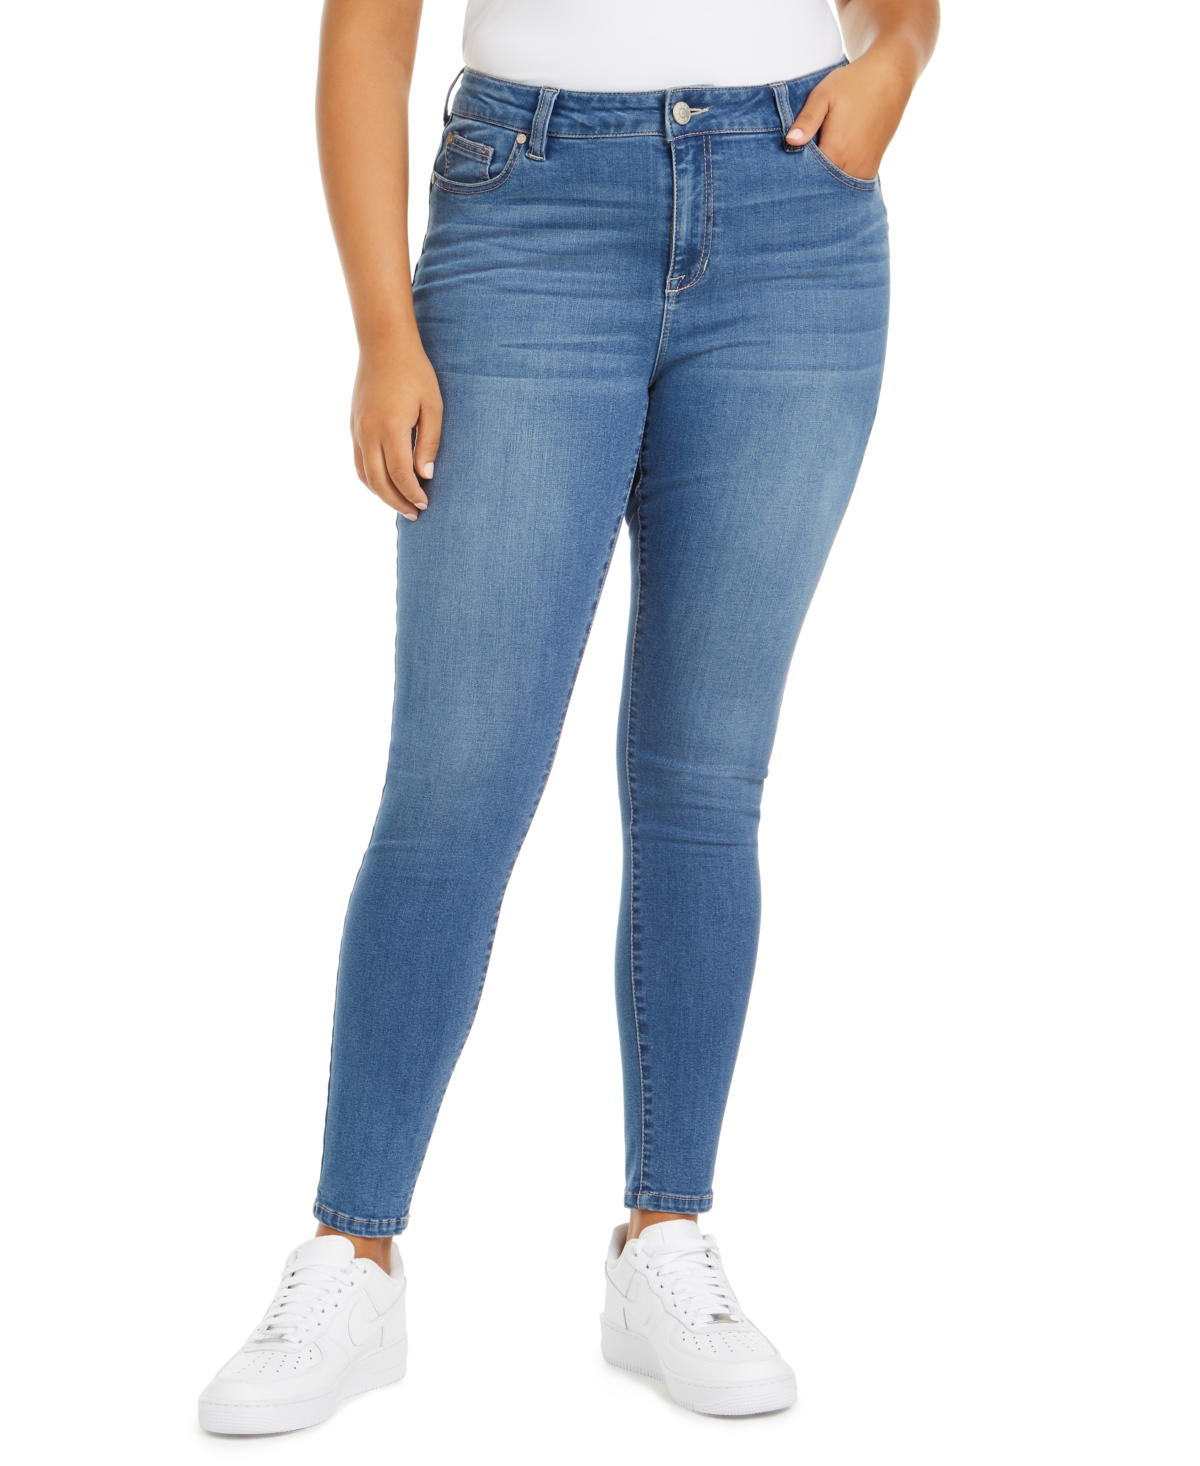 Celebrity Pink Trendy Plus Size Sculpted Skinny Jeans